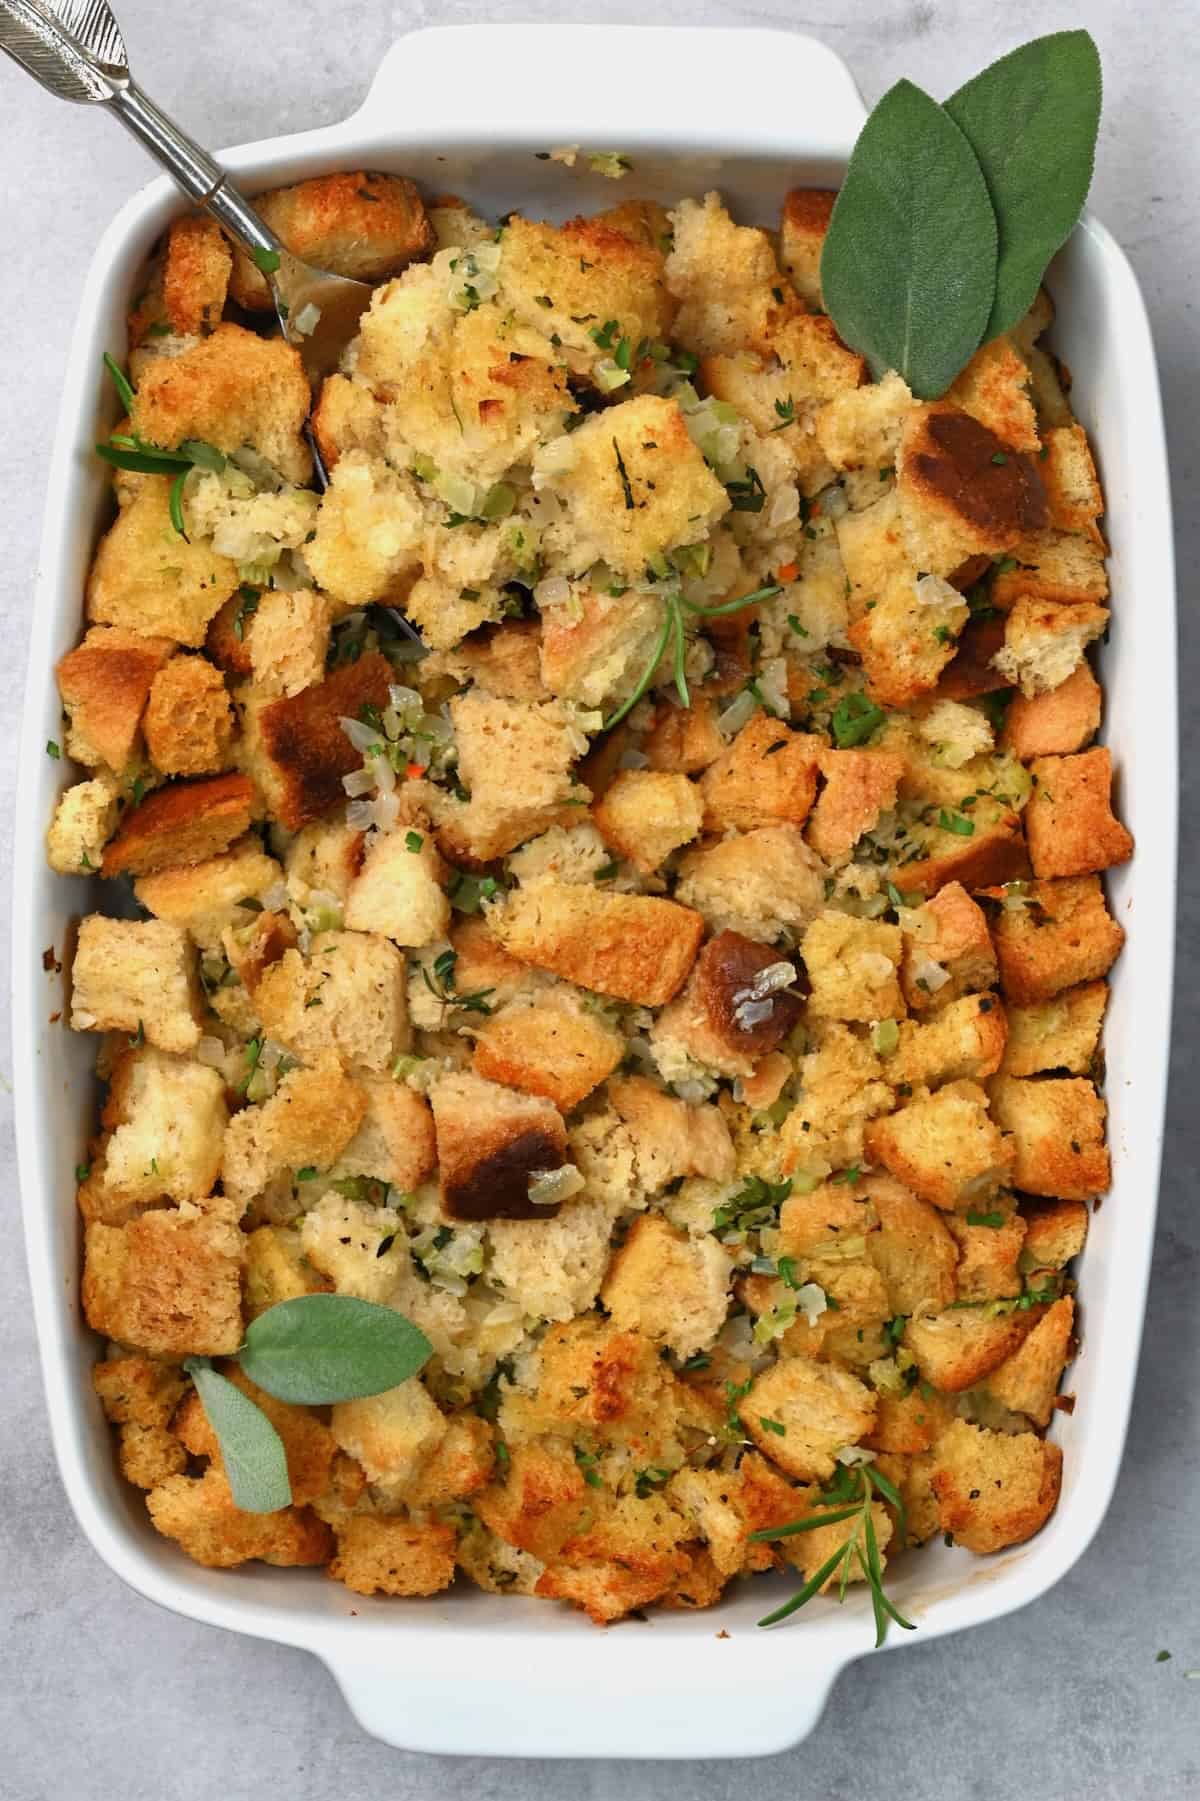 Homemade stuffing in a casserole dish